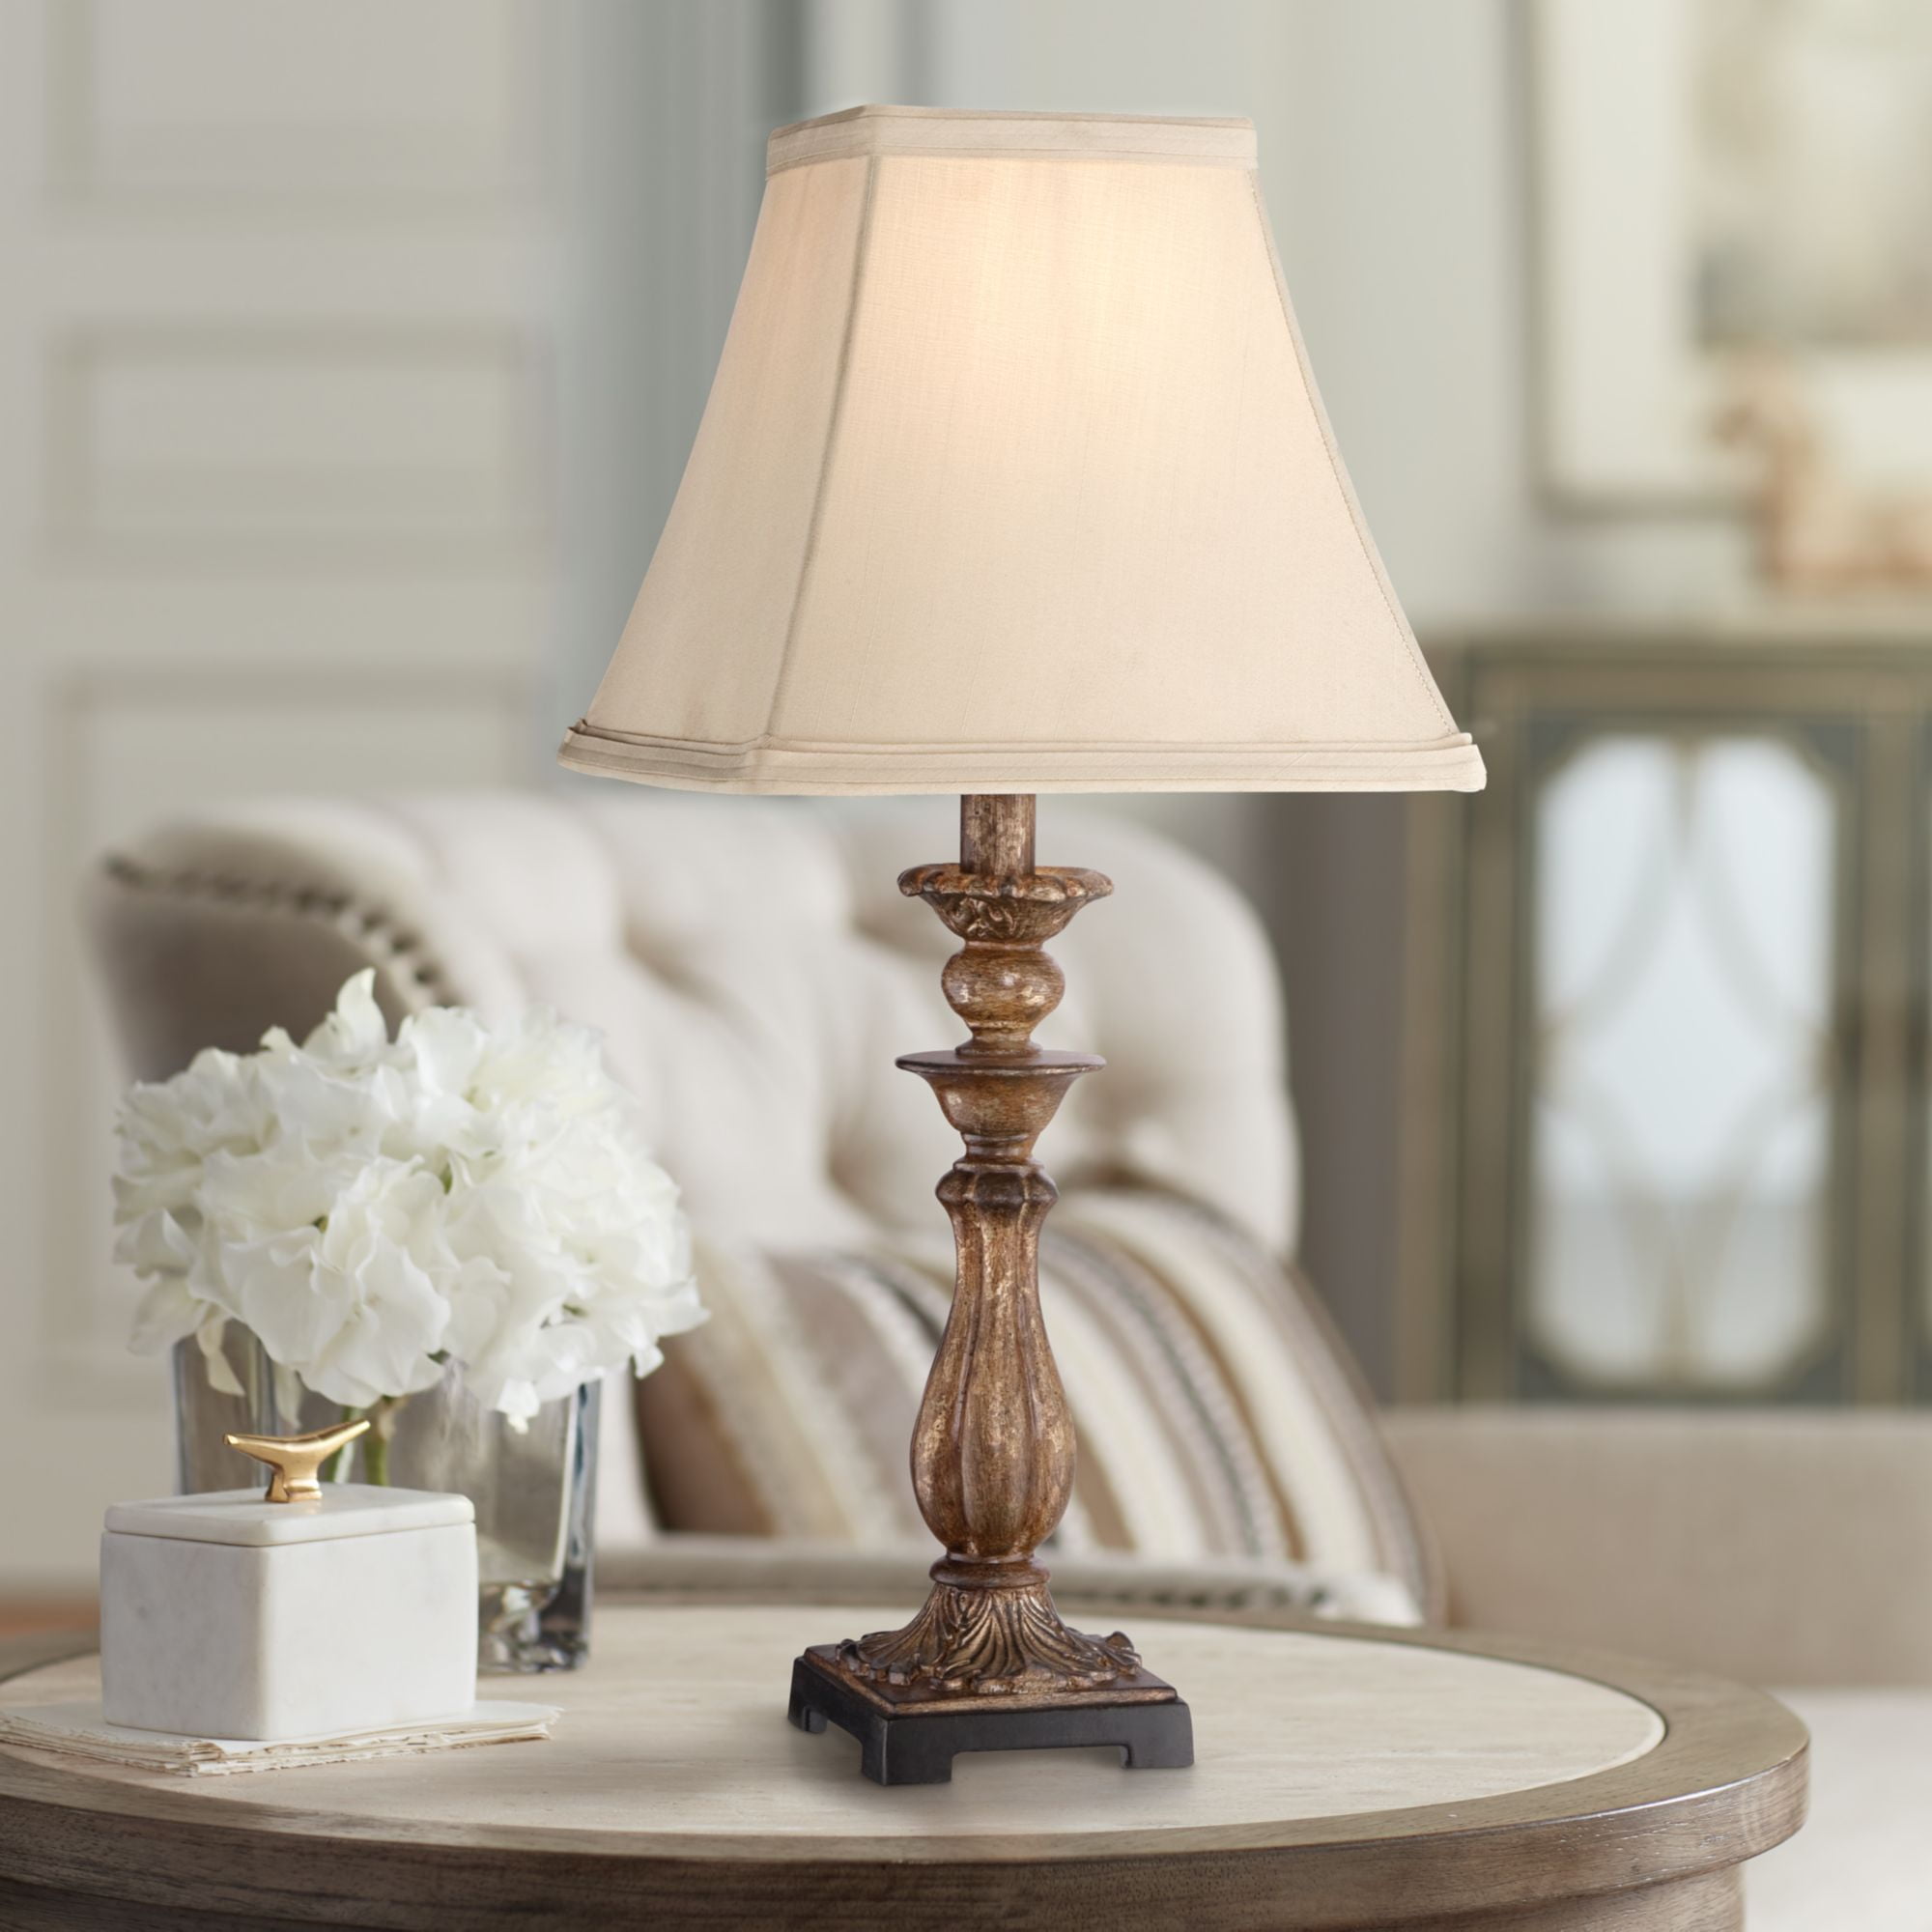 Regency Hill Cottage Accent Table Lamp, Small Table Lamp With Square Shade